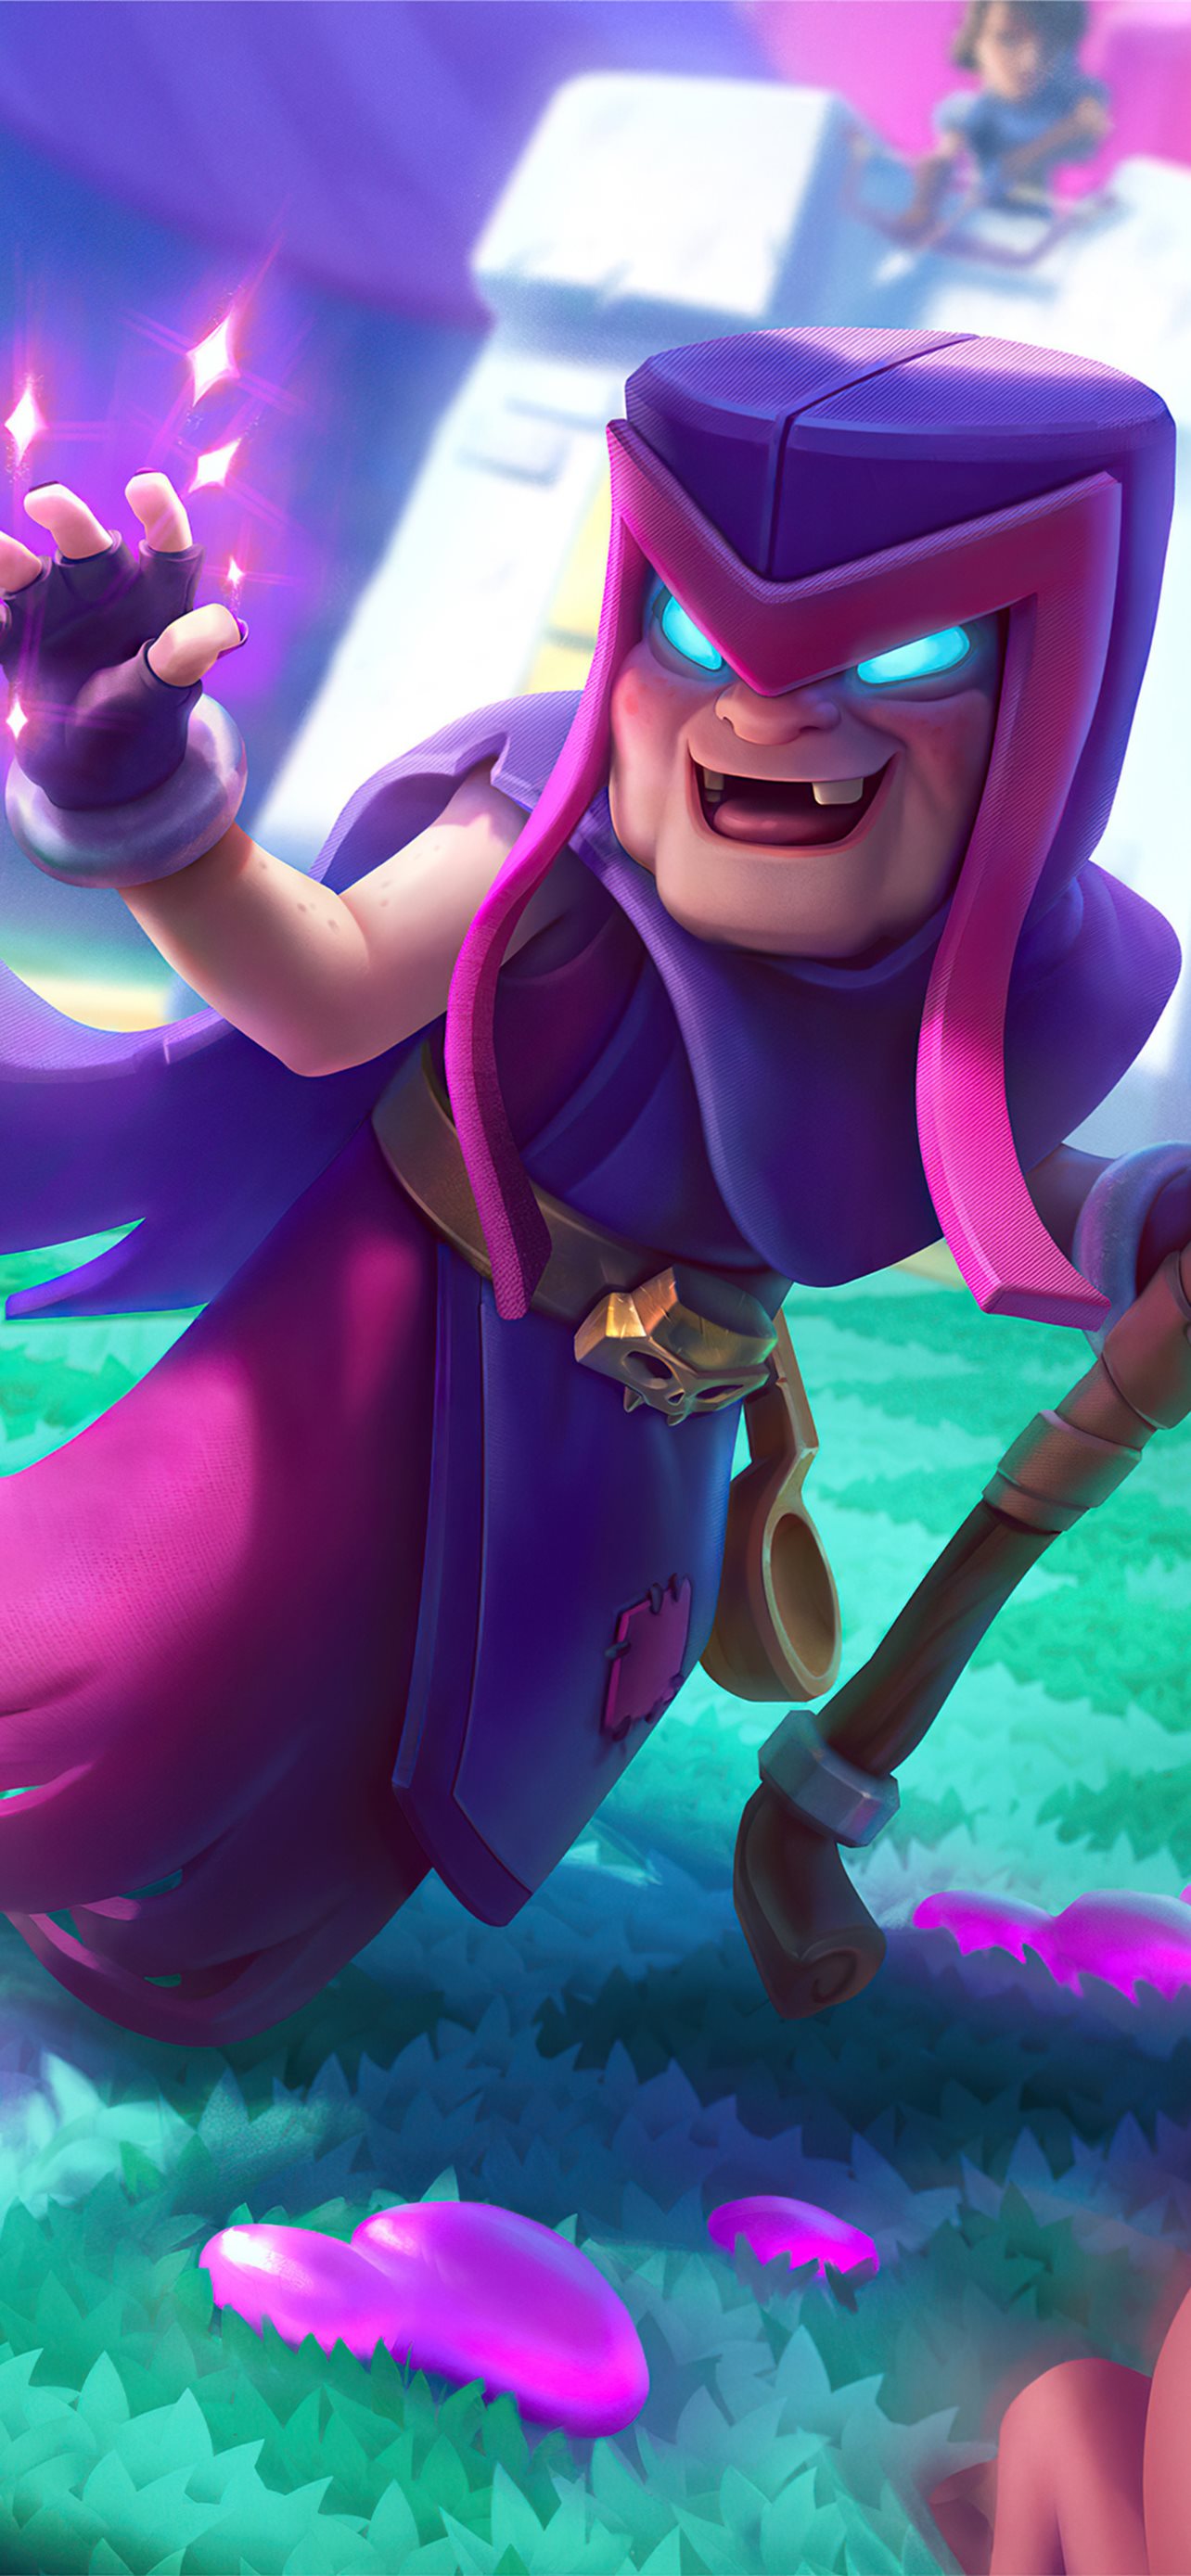 Motherwitch Clash Royale 4k Sony Xperia X XZ Z5 Pr... iPhone Wallpapers  Free Download